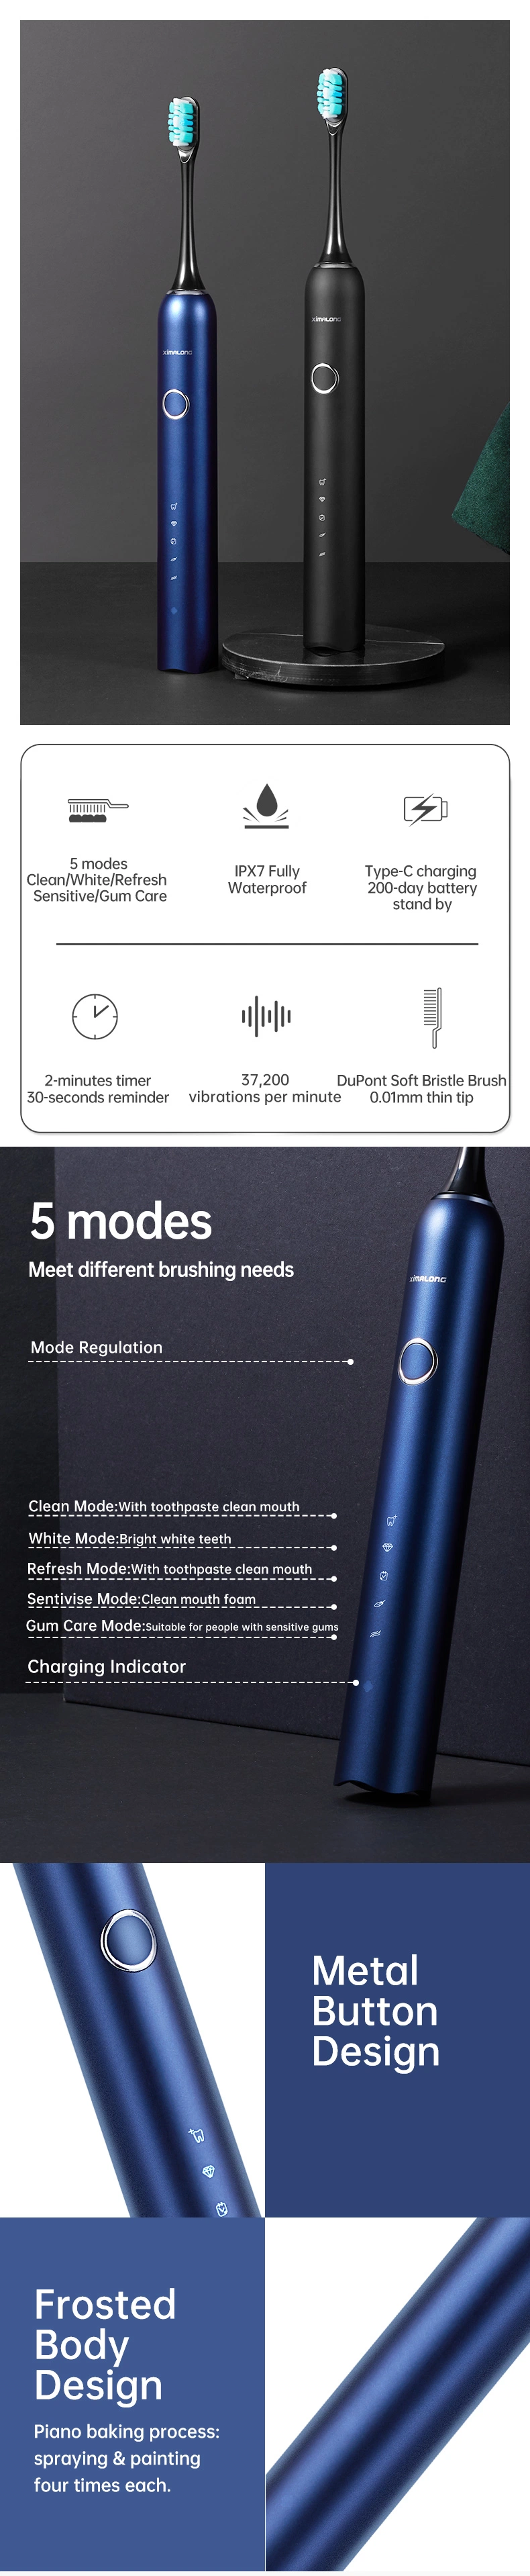 Dental Cleaning 360 Ultrasonic Electric Toothbrush Oral Electrical Smart Toothbrush with Logo